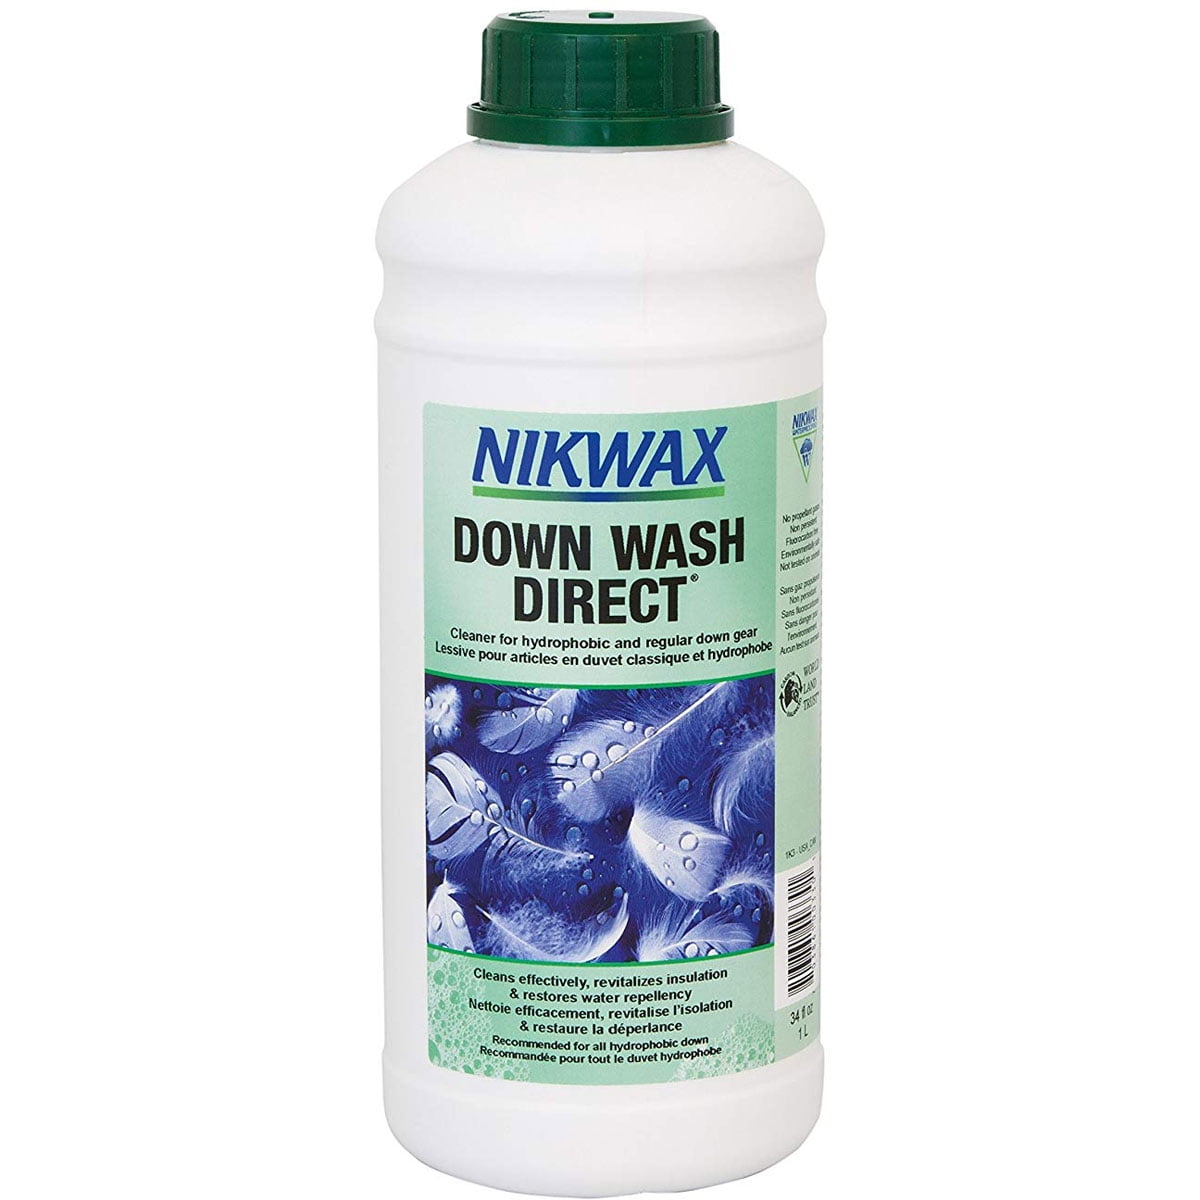  Nikwax Down, Down DUO-Pack, 300ml, Wash-In Cleaning and  Waterproofing adds DWR Water Repellency to Down Filled Jackets, Outerwear,  Sleeping Bags, Restores and Protects Insulation and Loft : Automotive